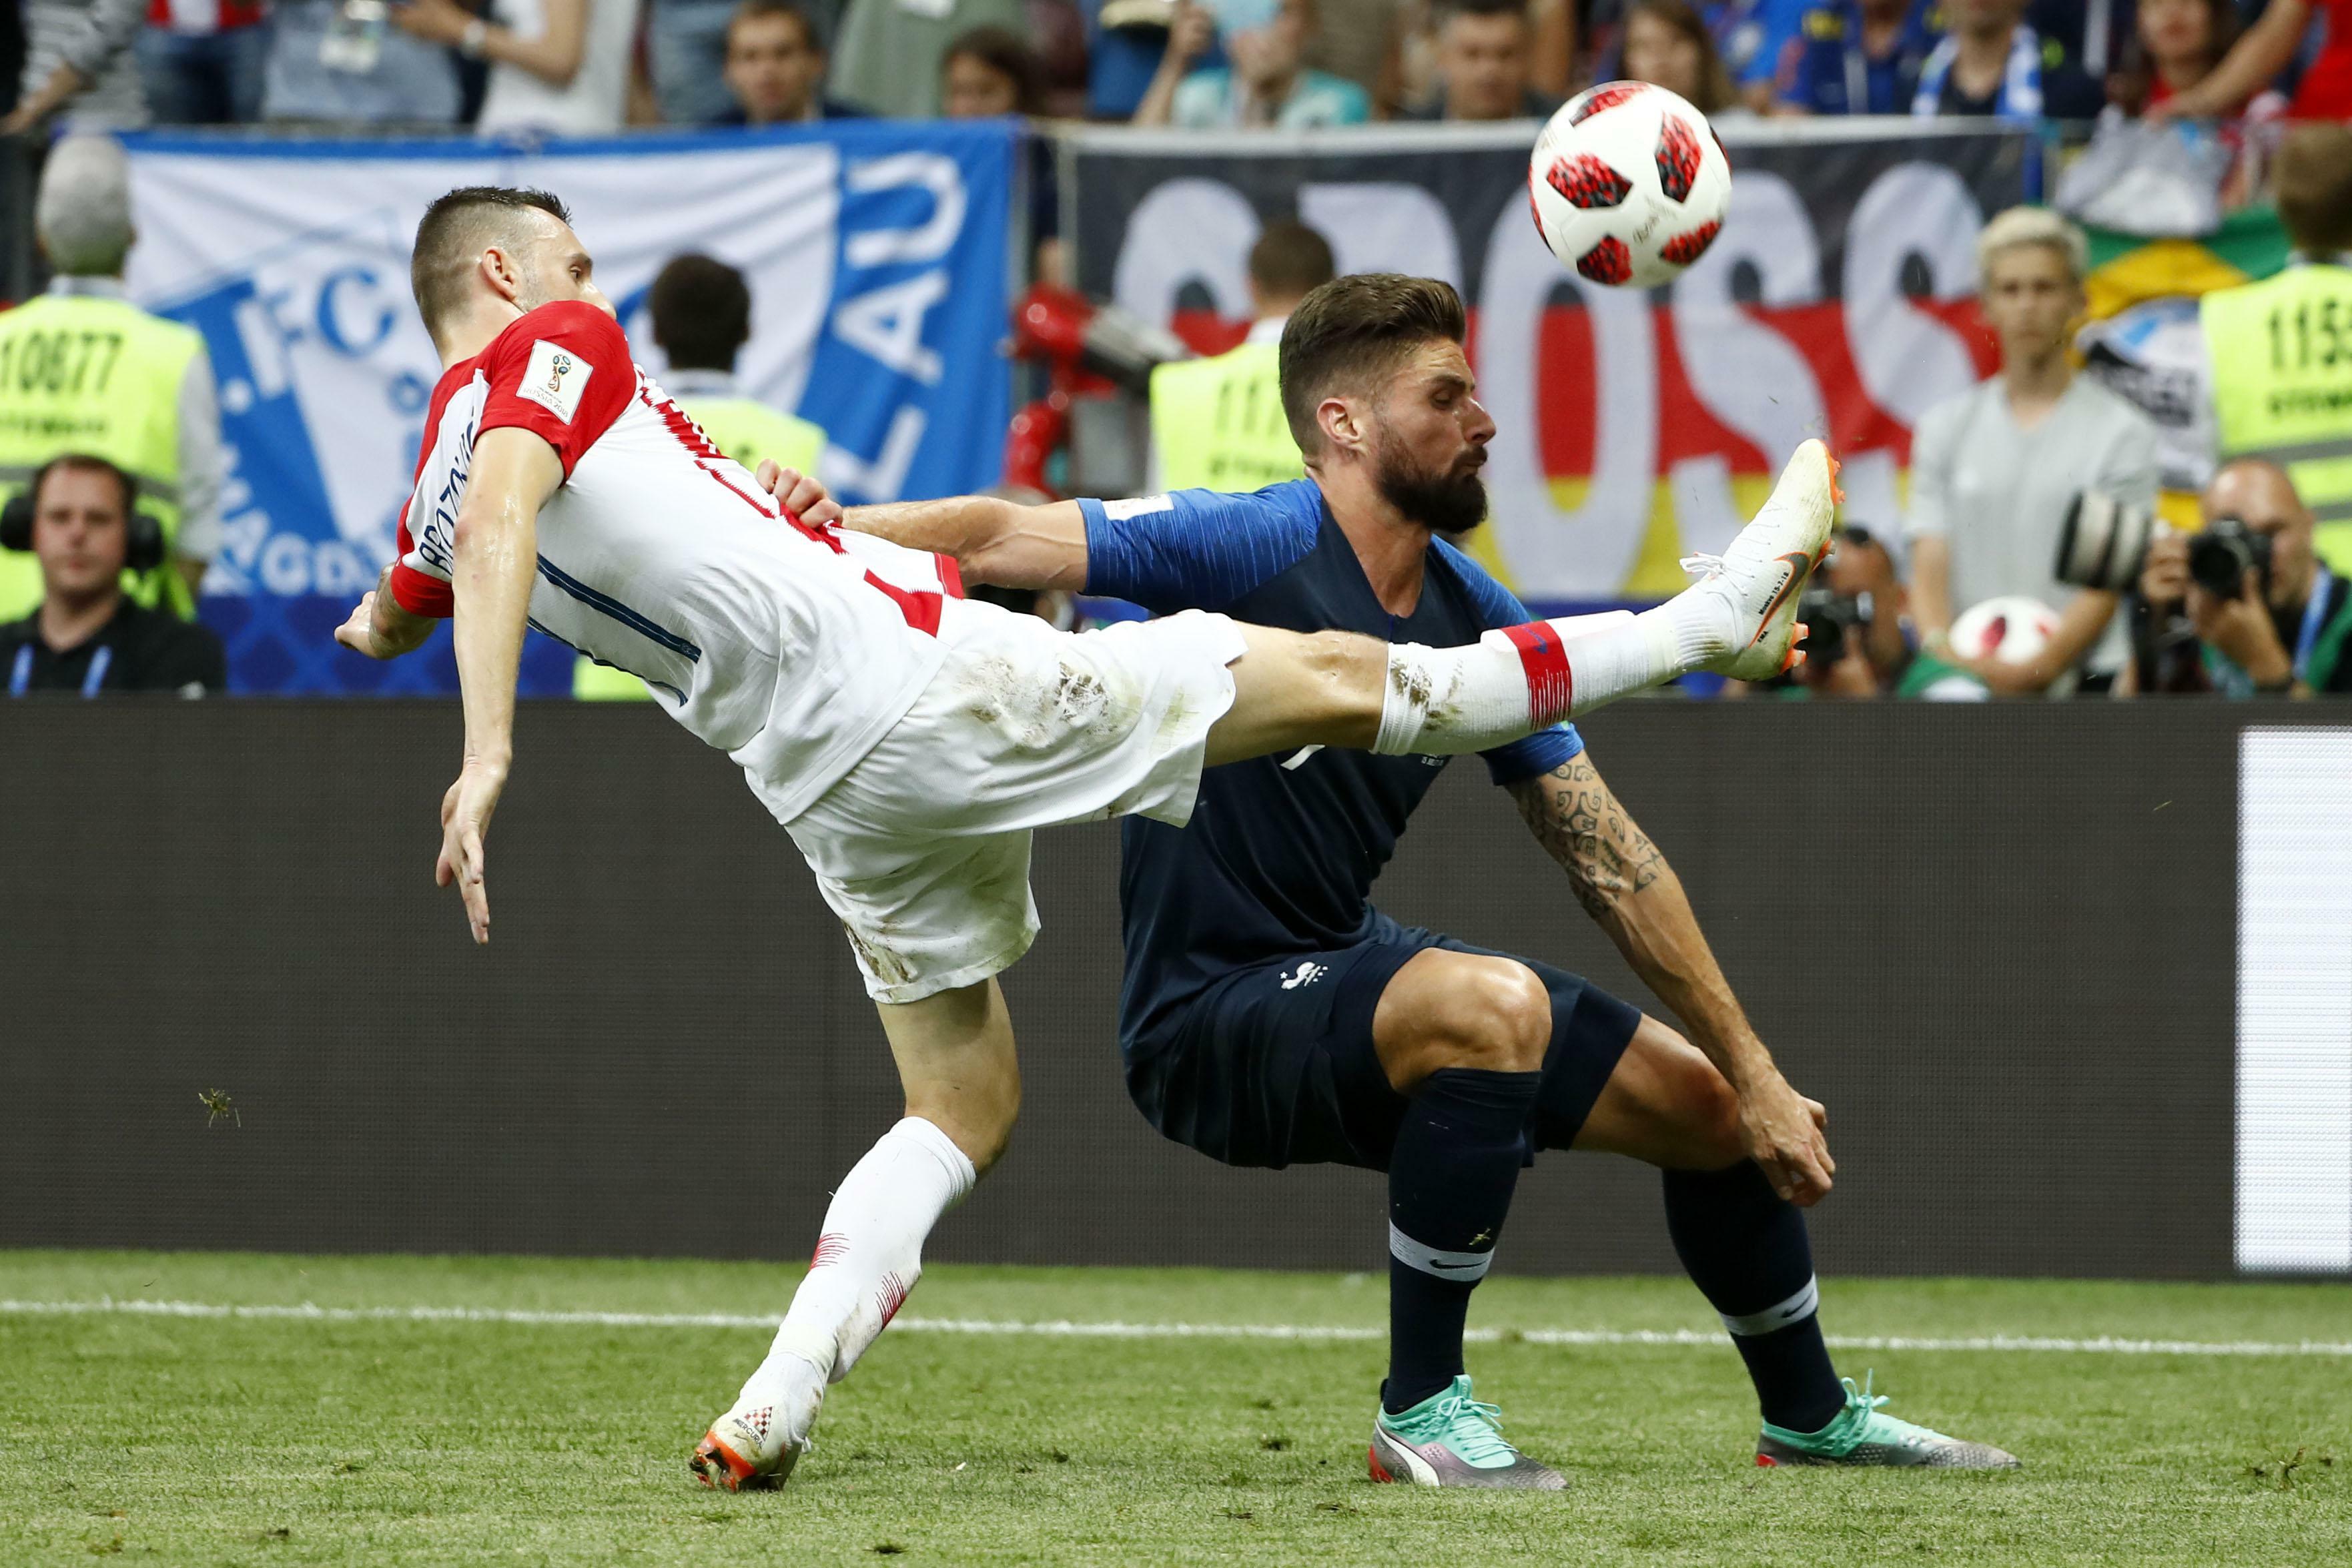 Two men playing world cup soccer